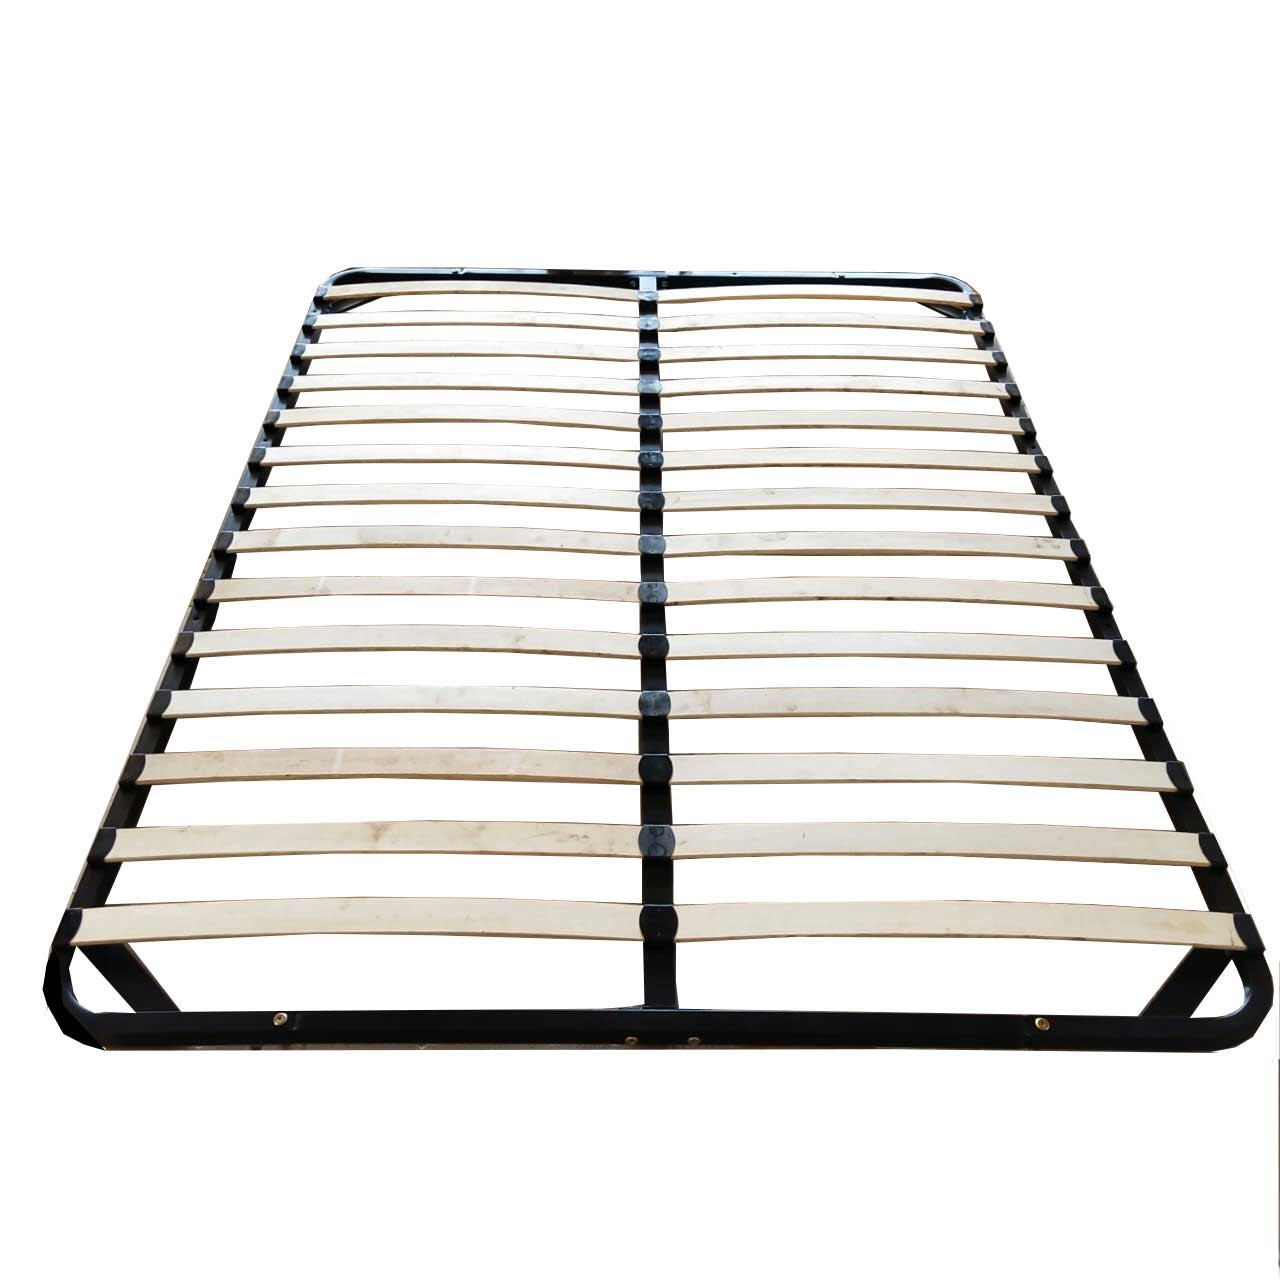 Lift-up Metal Bed Frame Top (1525 x 2000 mm)